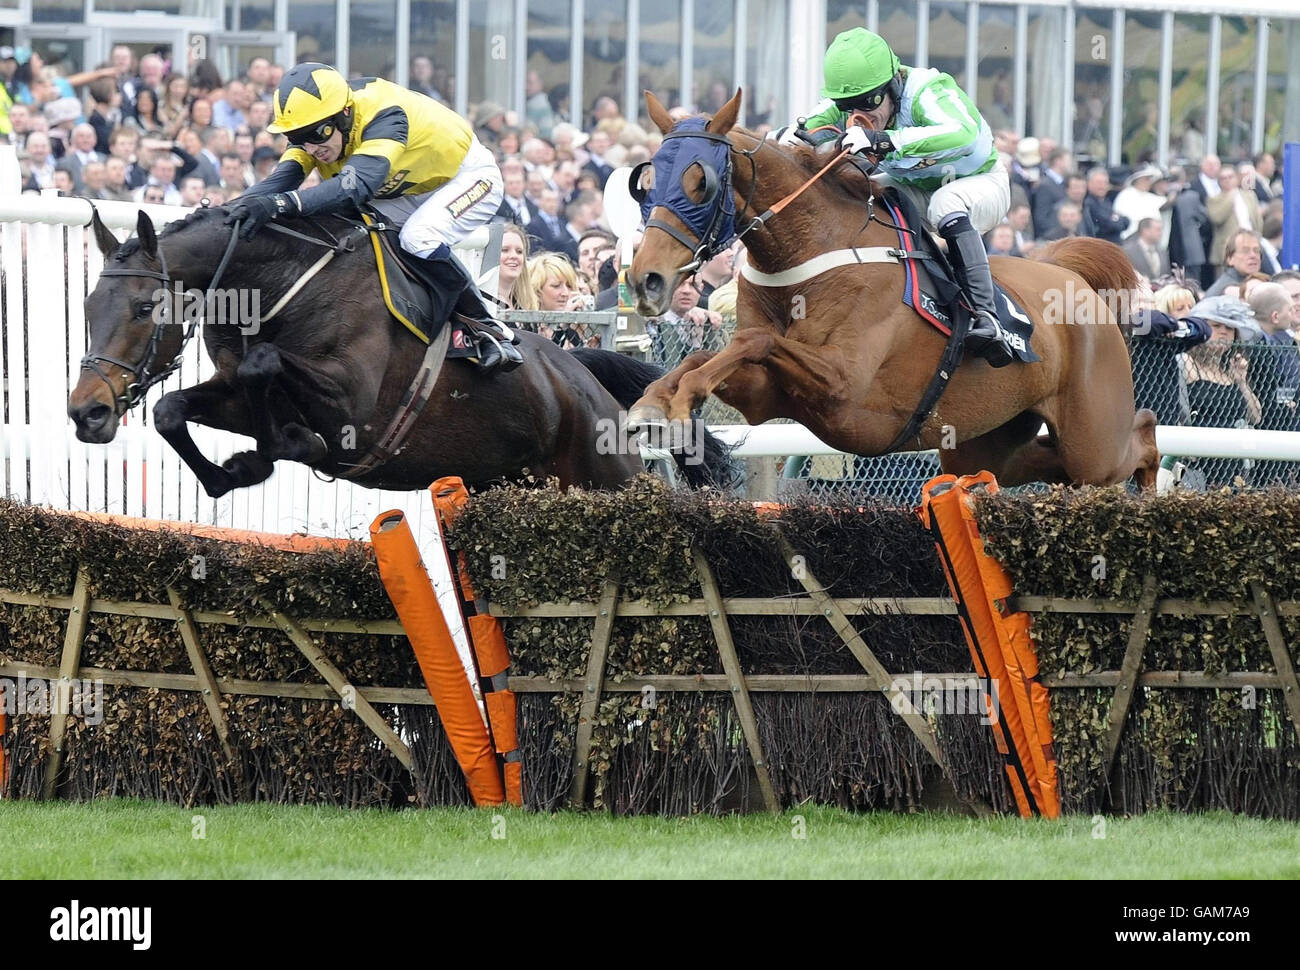 Paddy Brennan and Pettifour (left) jumps alongside Tony McCoy and Gone To Lunch on his way to victory in the Citroen C5 Sefton Novices Hurdle during the Grand National Meeting at Aintree Racecourse, Liverpool. Stock Photo